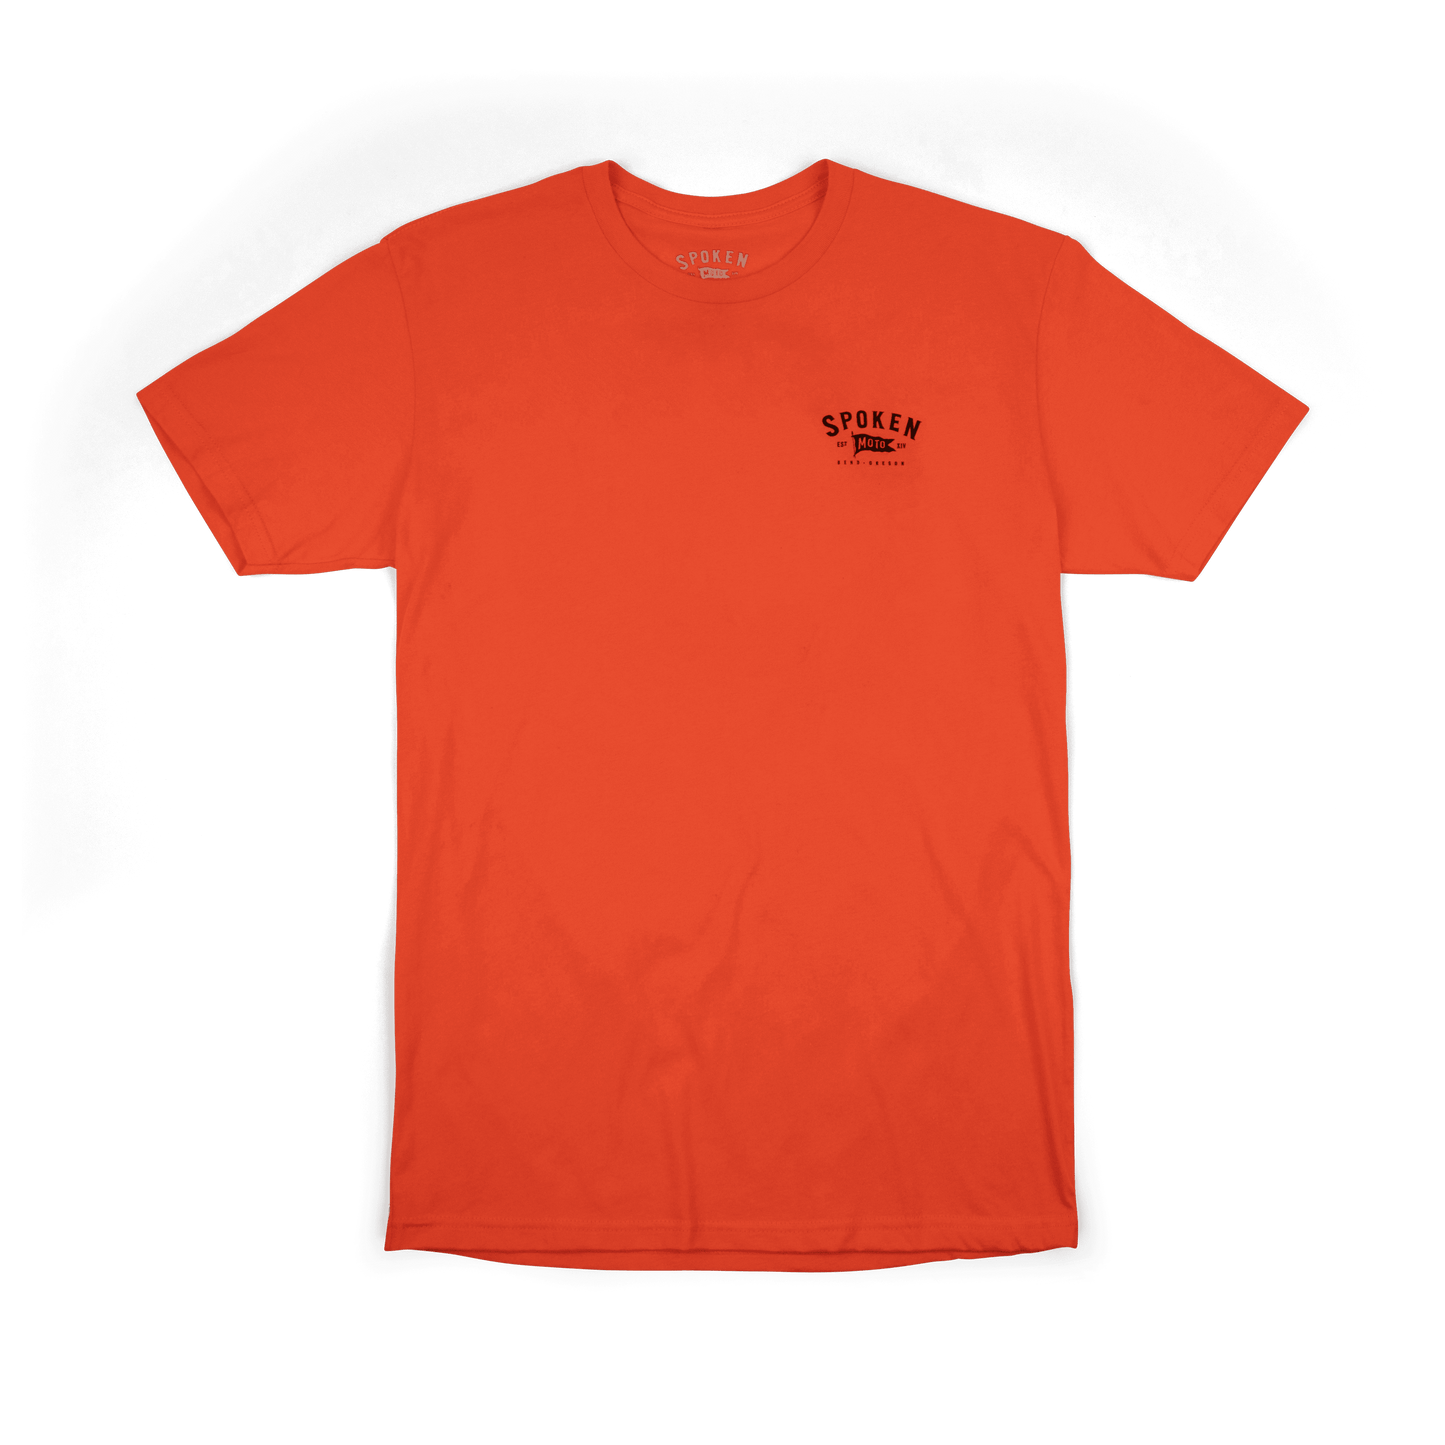 Tee from the front: orange tee with black Spoken Moto flag logo on the upper left chest.